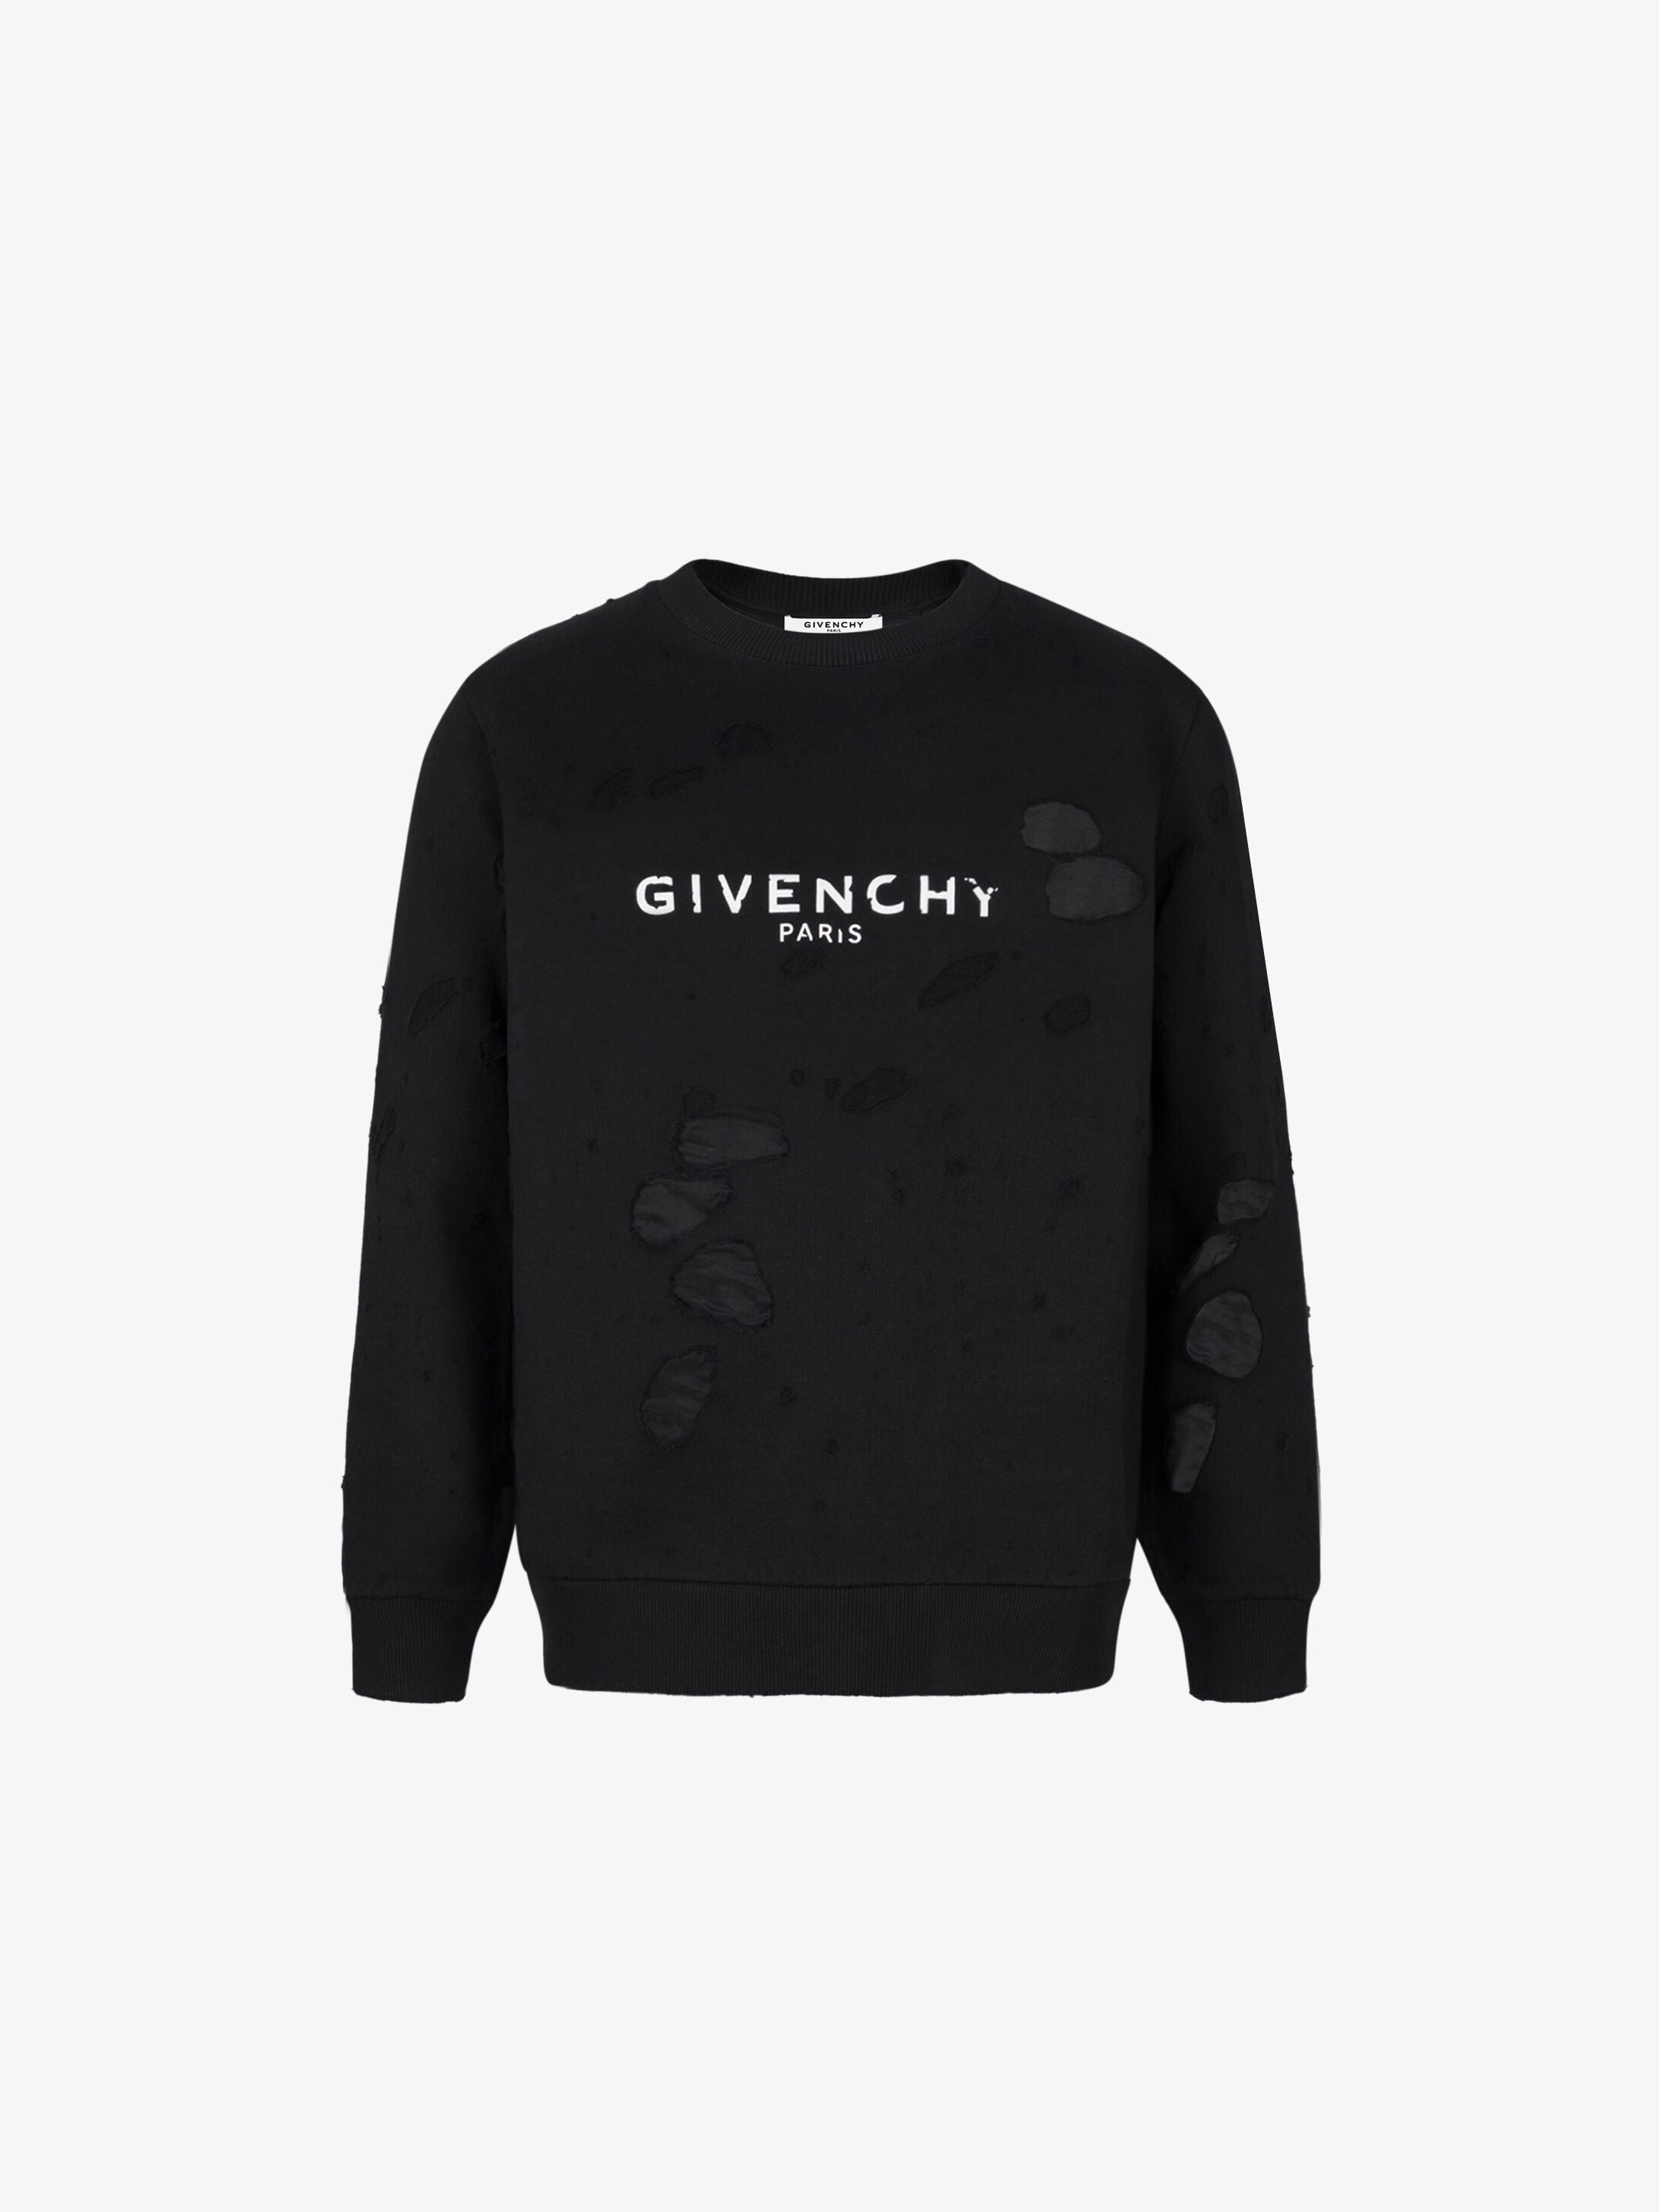 givenchy t shirt skroutz off 57% - www 